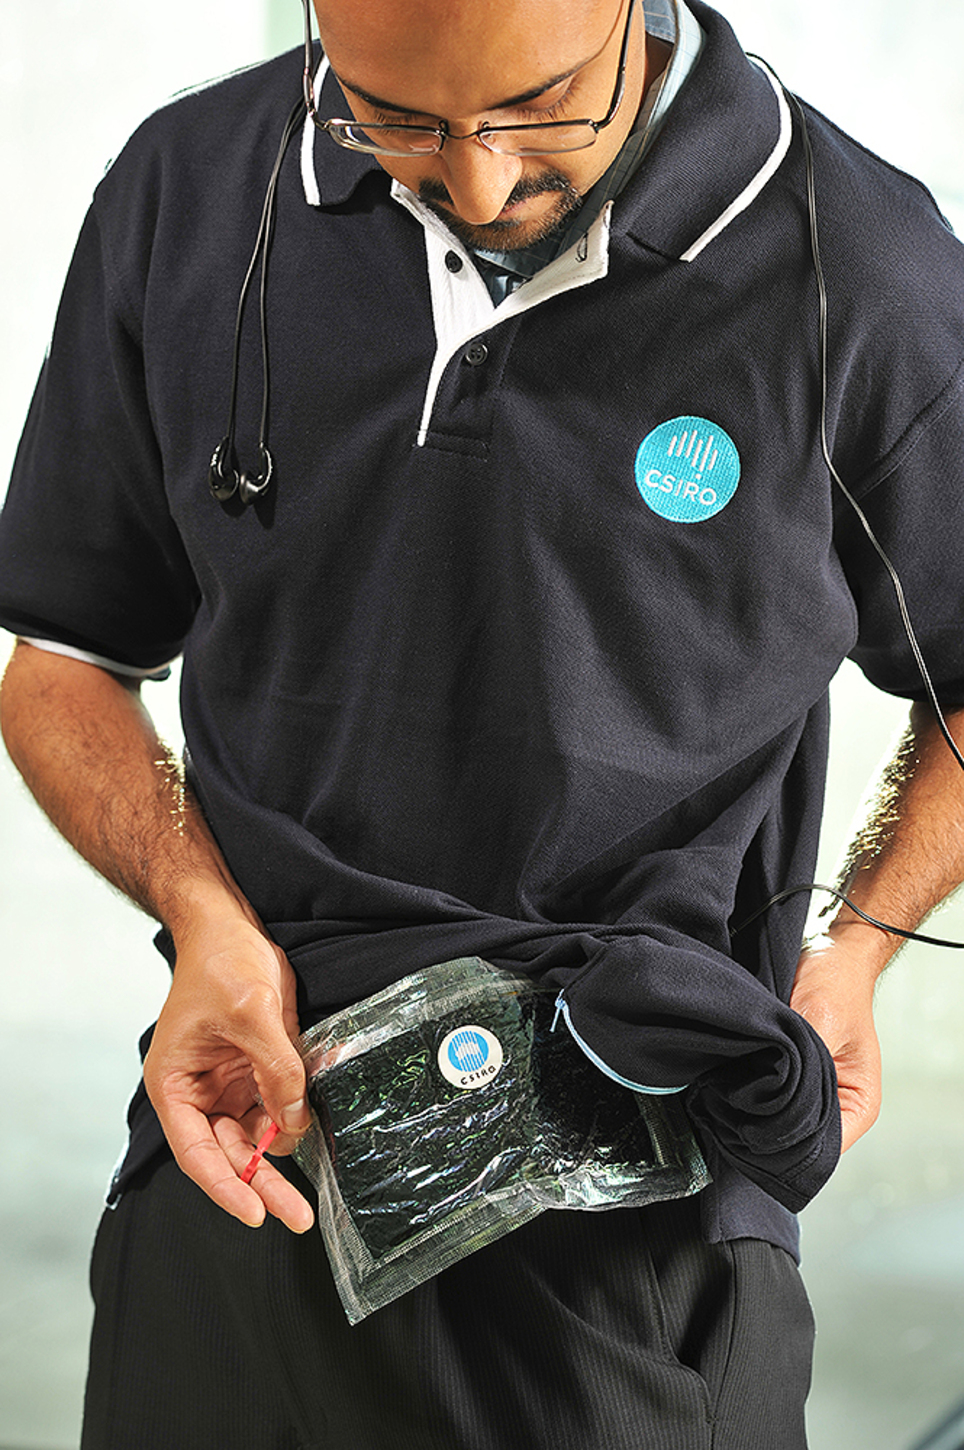 CSIRO researcher Dr Anand Bhatt models a shirt with a pocket incorporating the CSIRO flexible battery, which can be used to power small consumer electronic devices